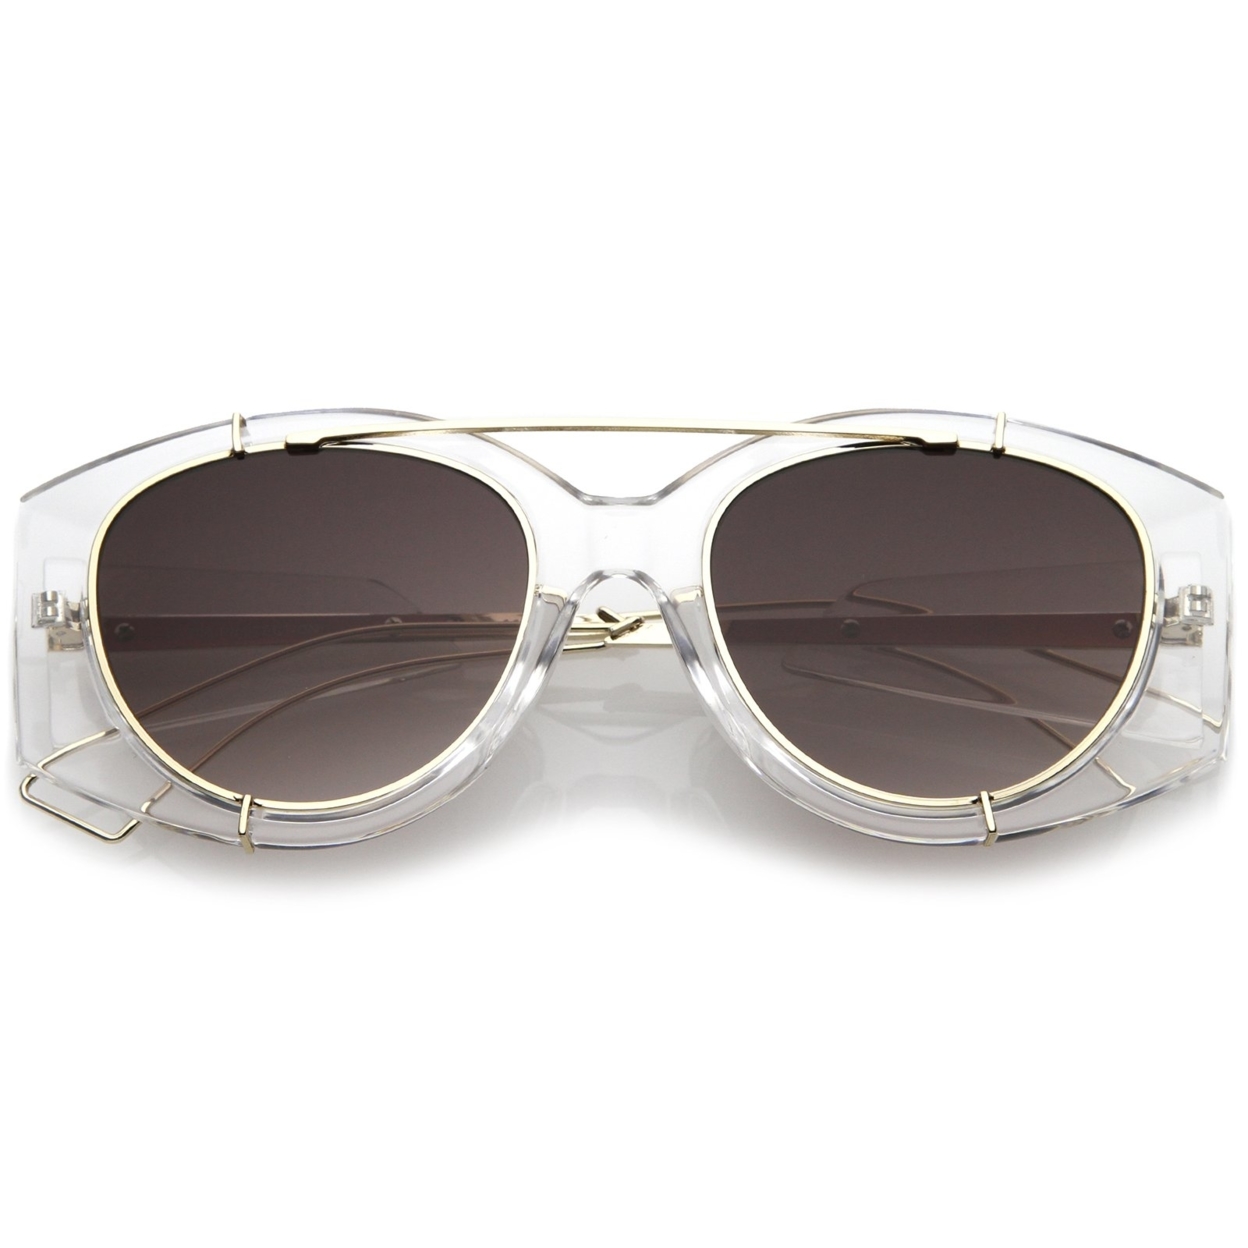 Futuristic Translucent Wire Metal Arms Crossbar Round Flat Lens Oversize Sunglasses 53mm - Clear Gold / Pink Gradient